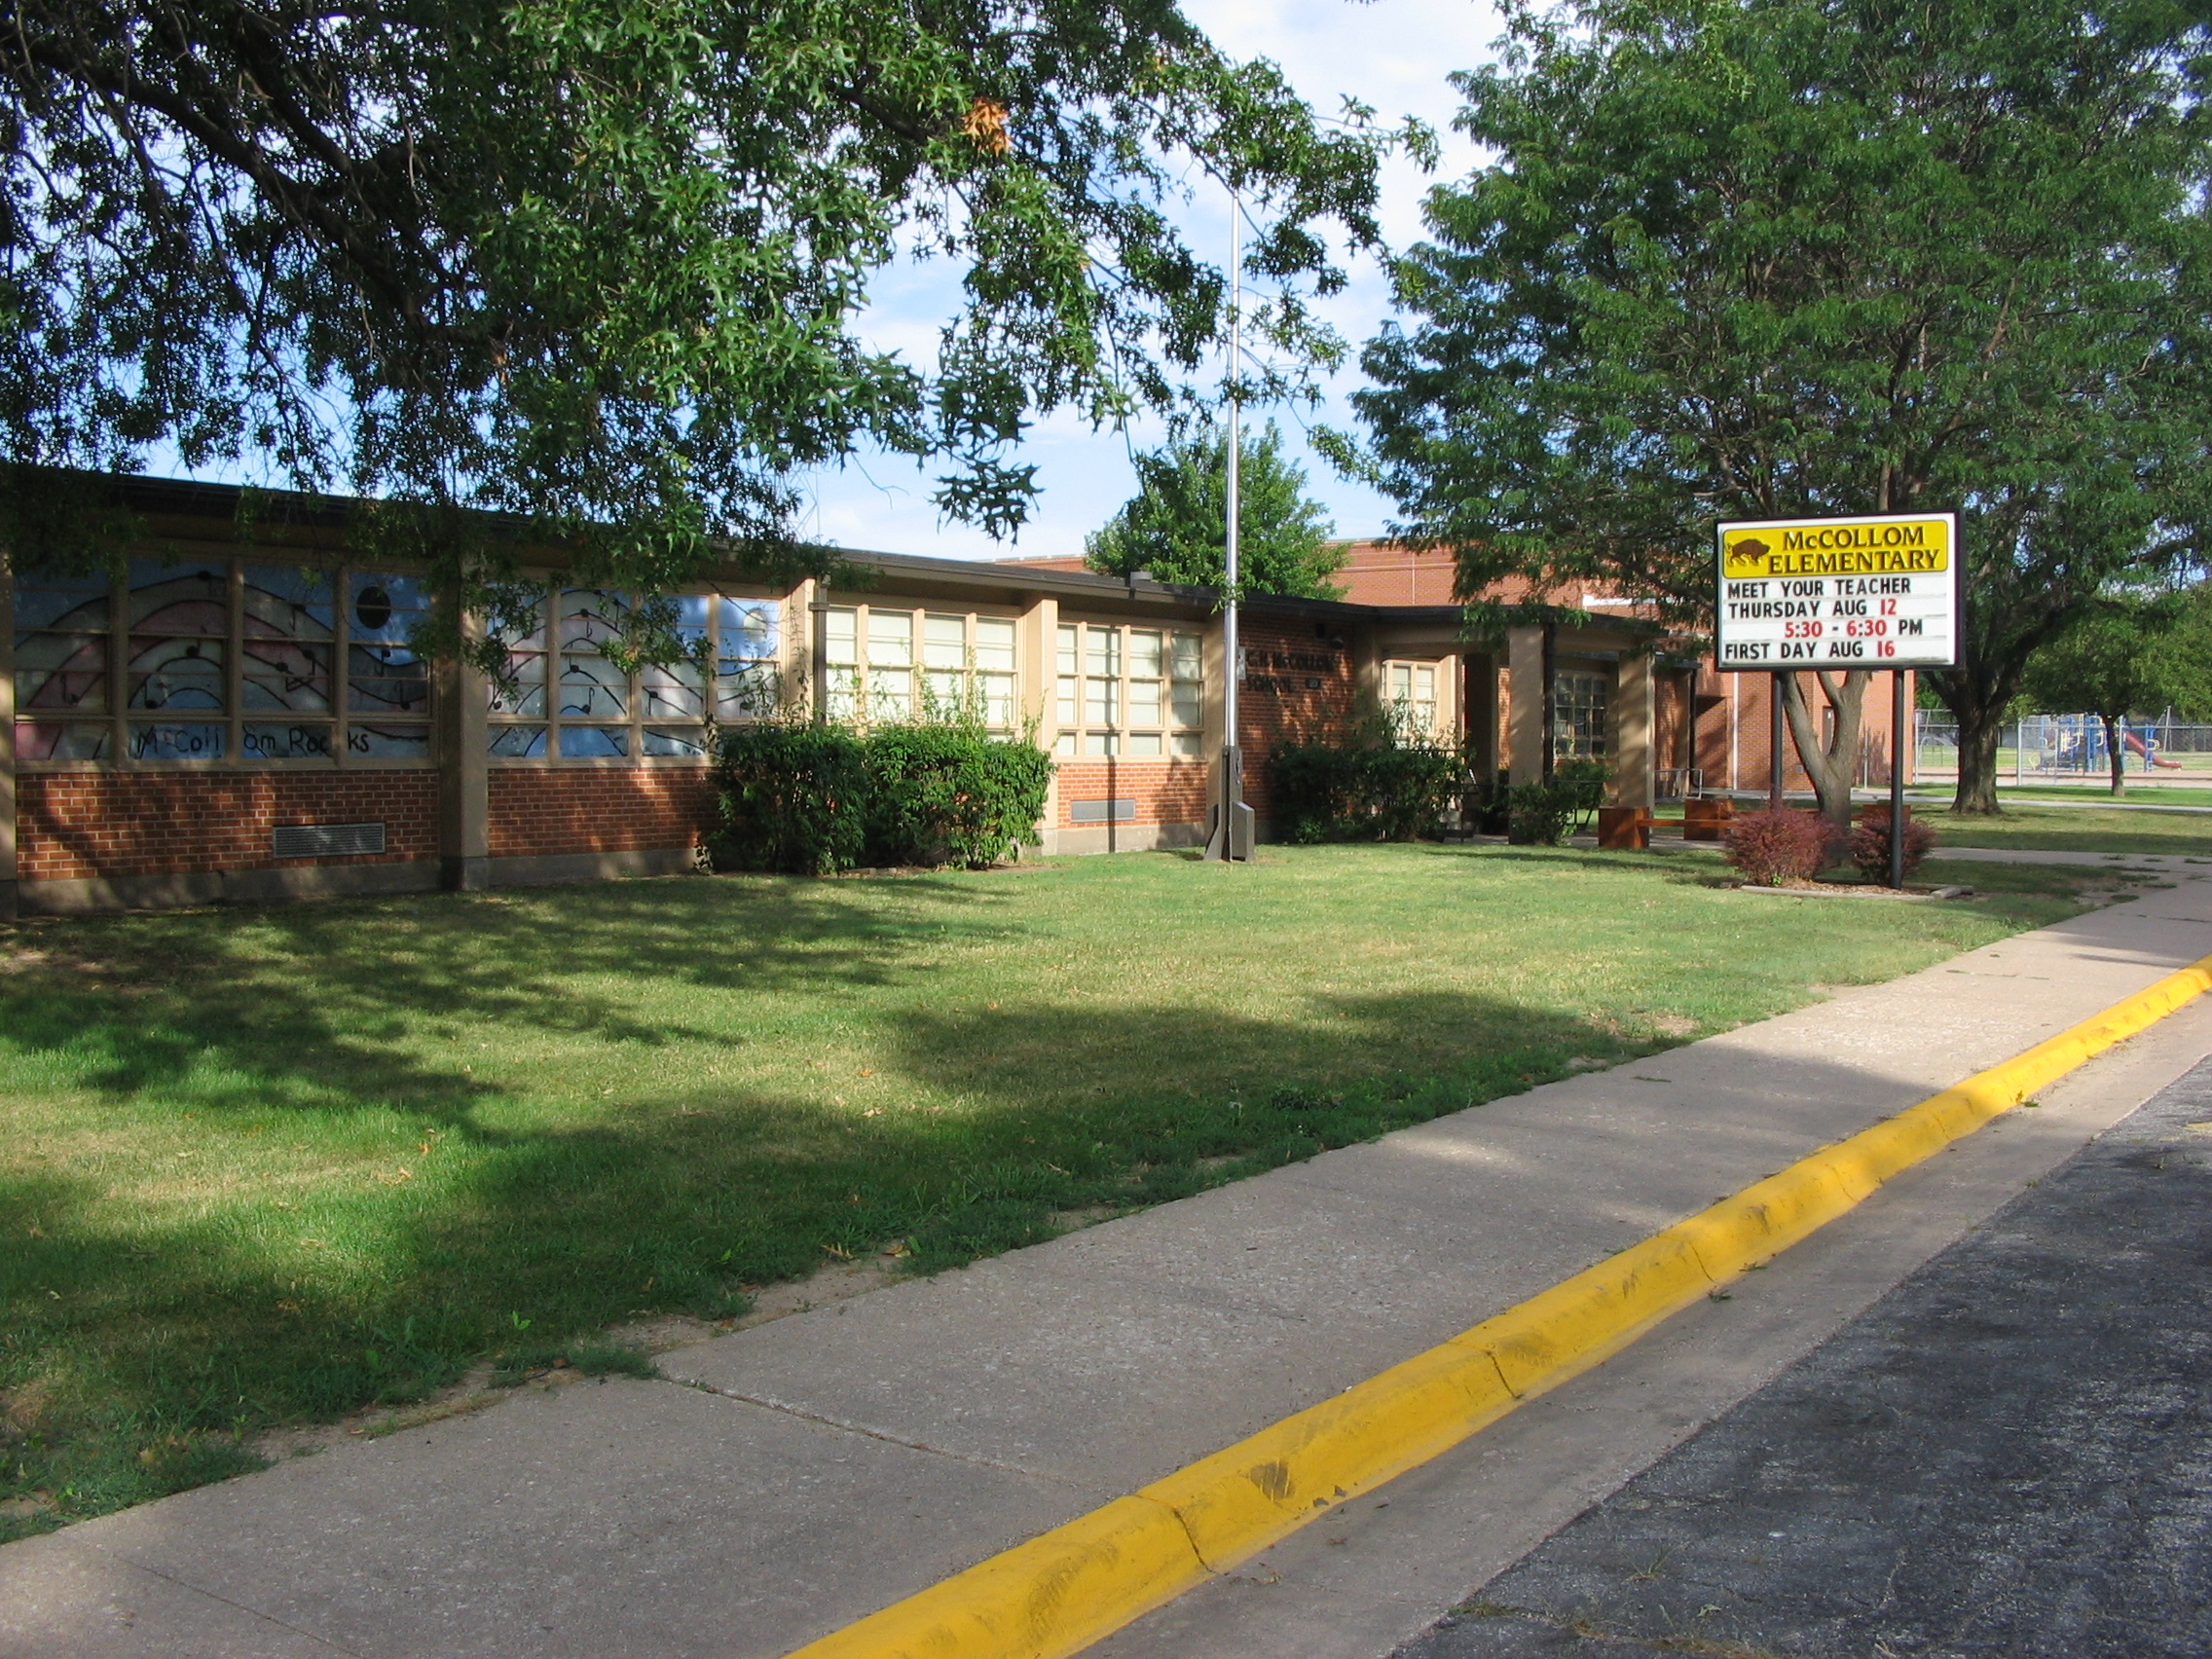 Image of the front of McCollom Elementary School